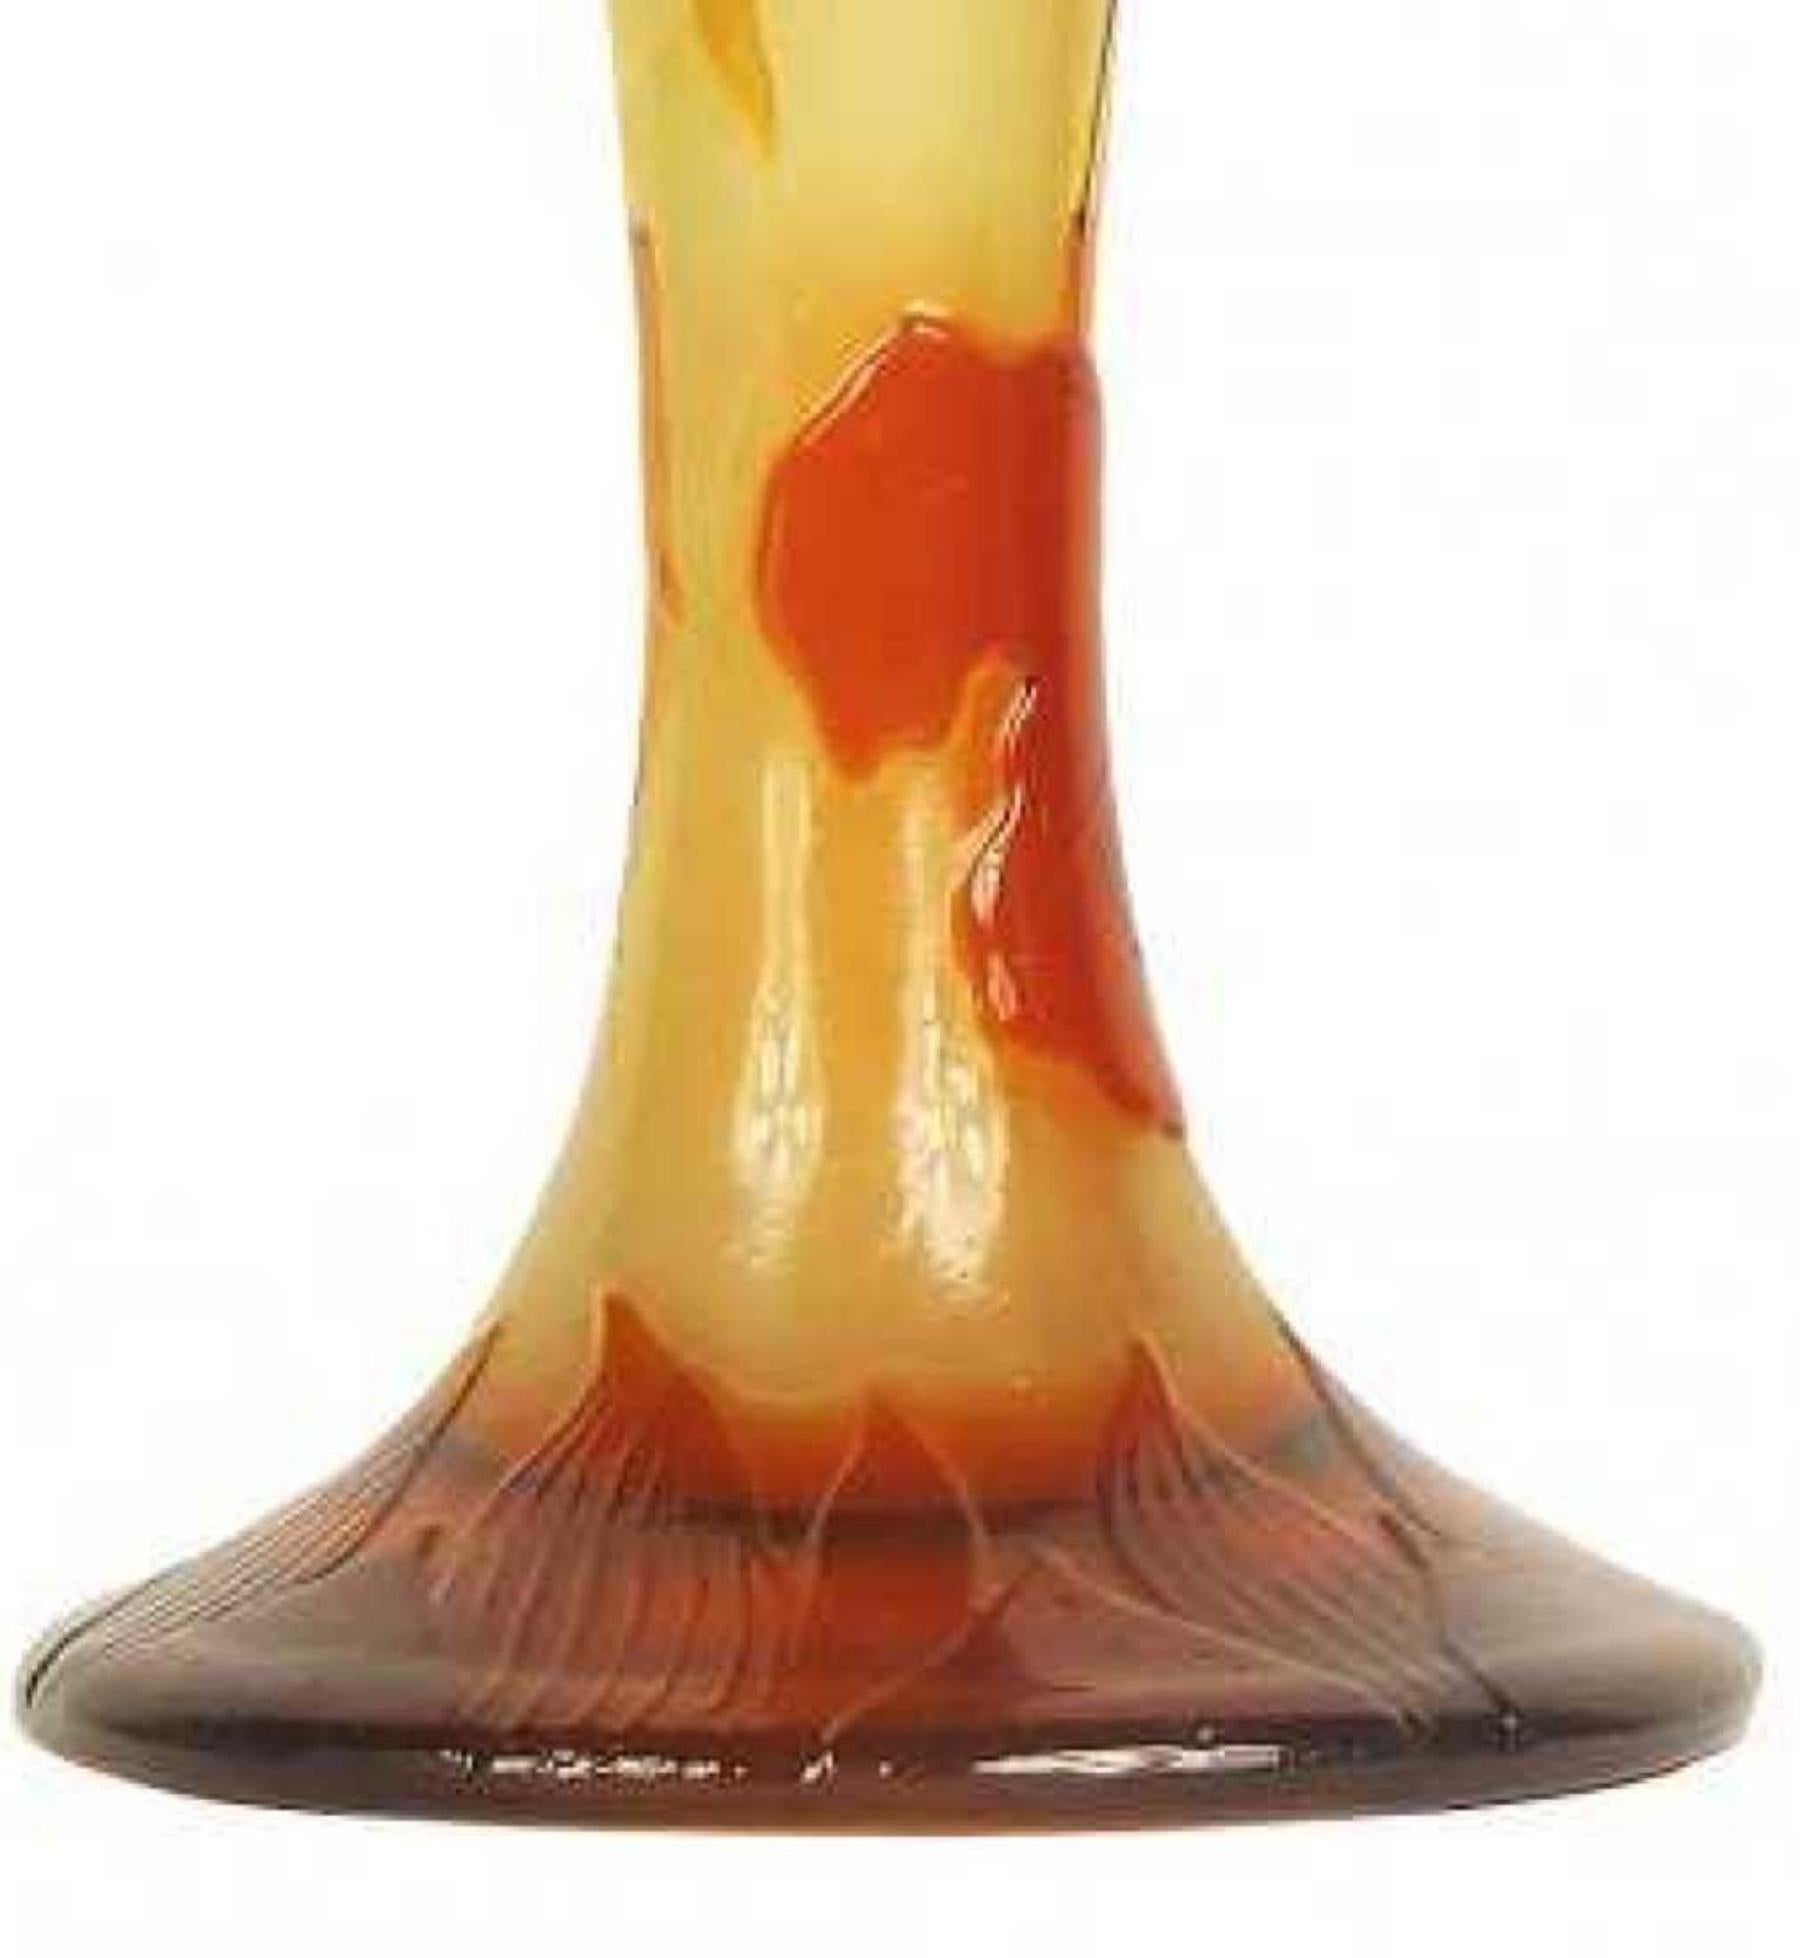 'Dahlia' Fire-Polished Cameo Glass Vase, Signed by Emile Gallé, circa 1900 For Sale 1